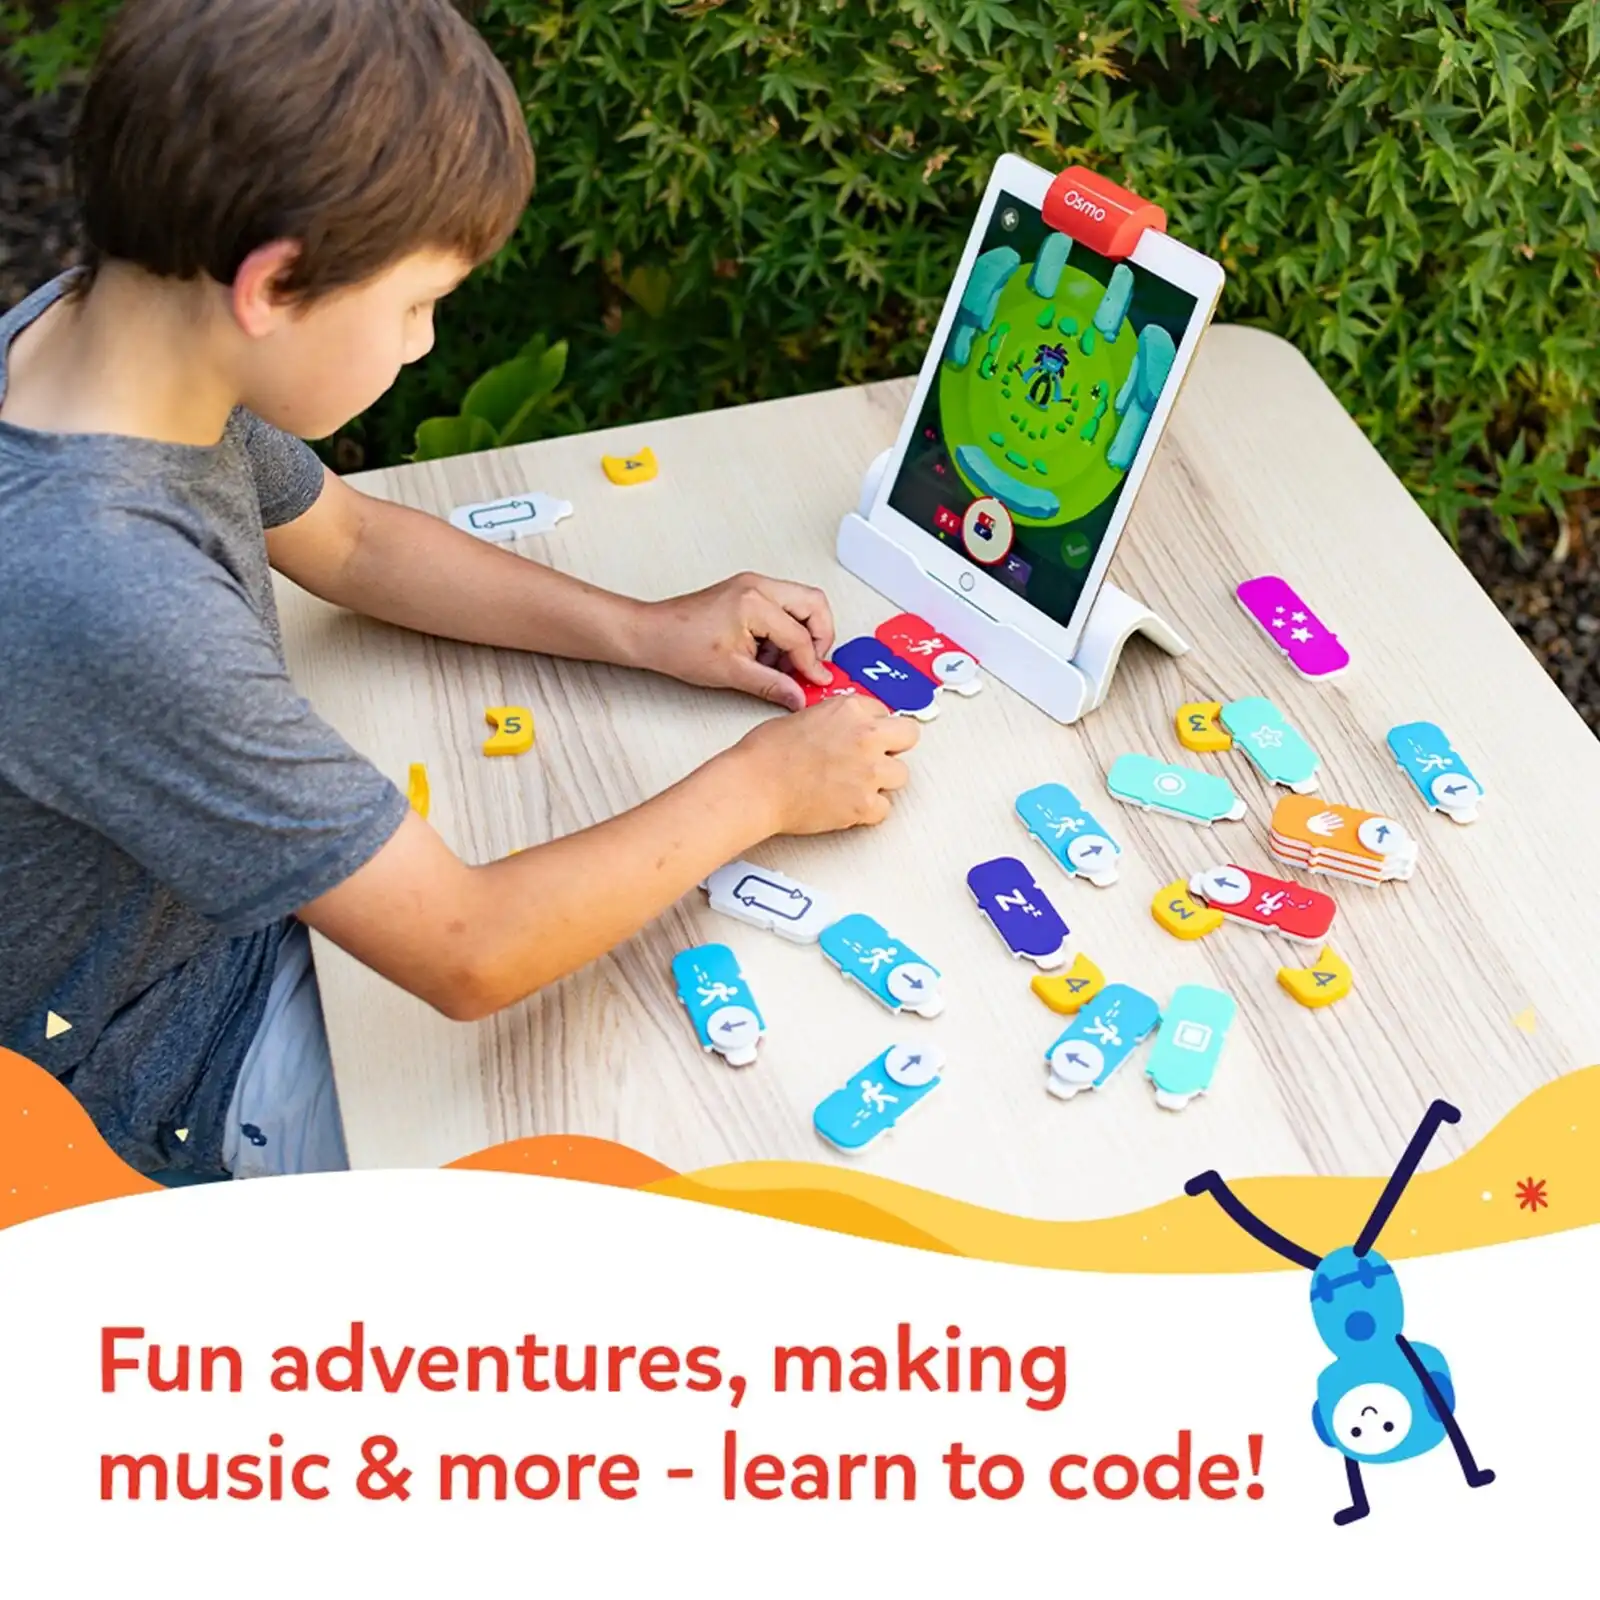 Osmo Coding Starter Kit Kids Educational Programming Learning Game for iPad 5y+